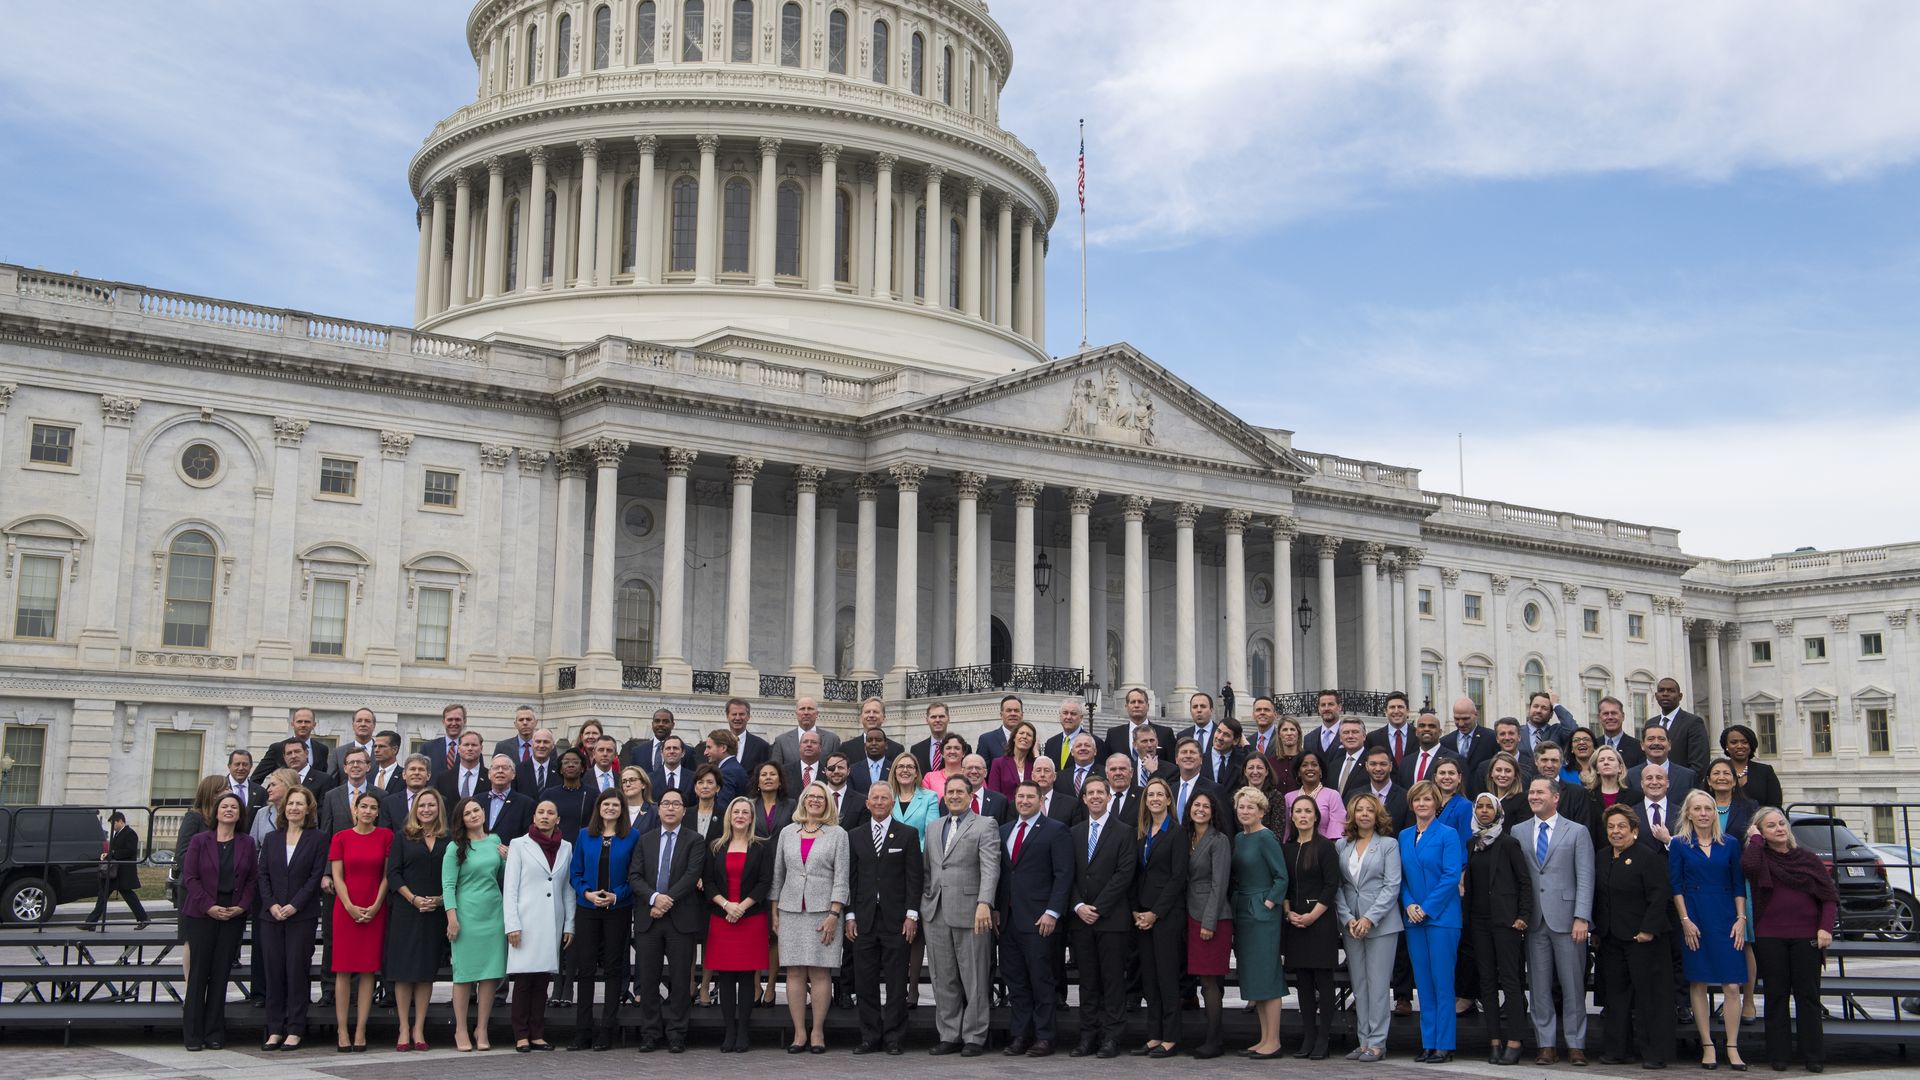 116th members-elect class photo before the capitol dome.